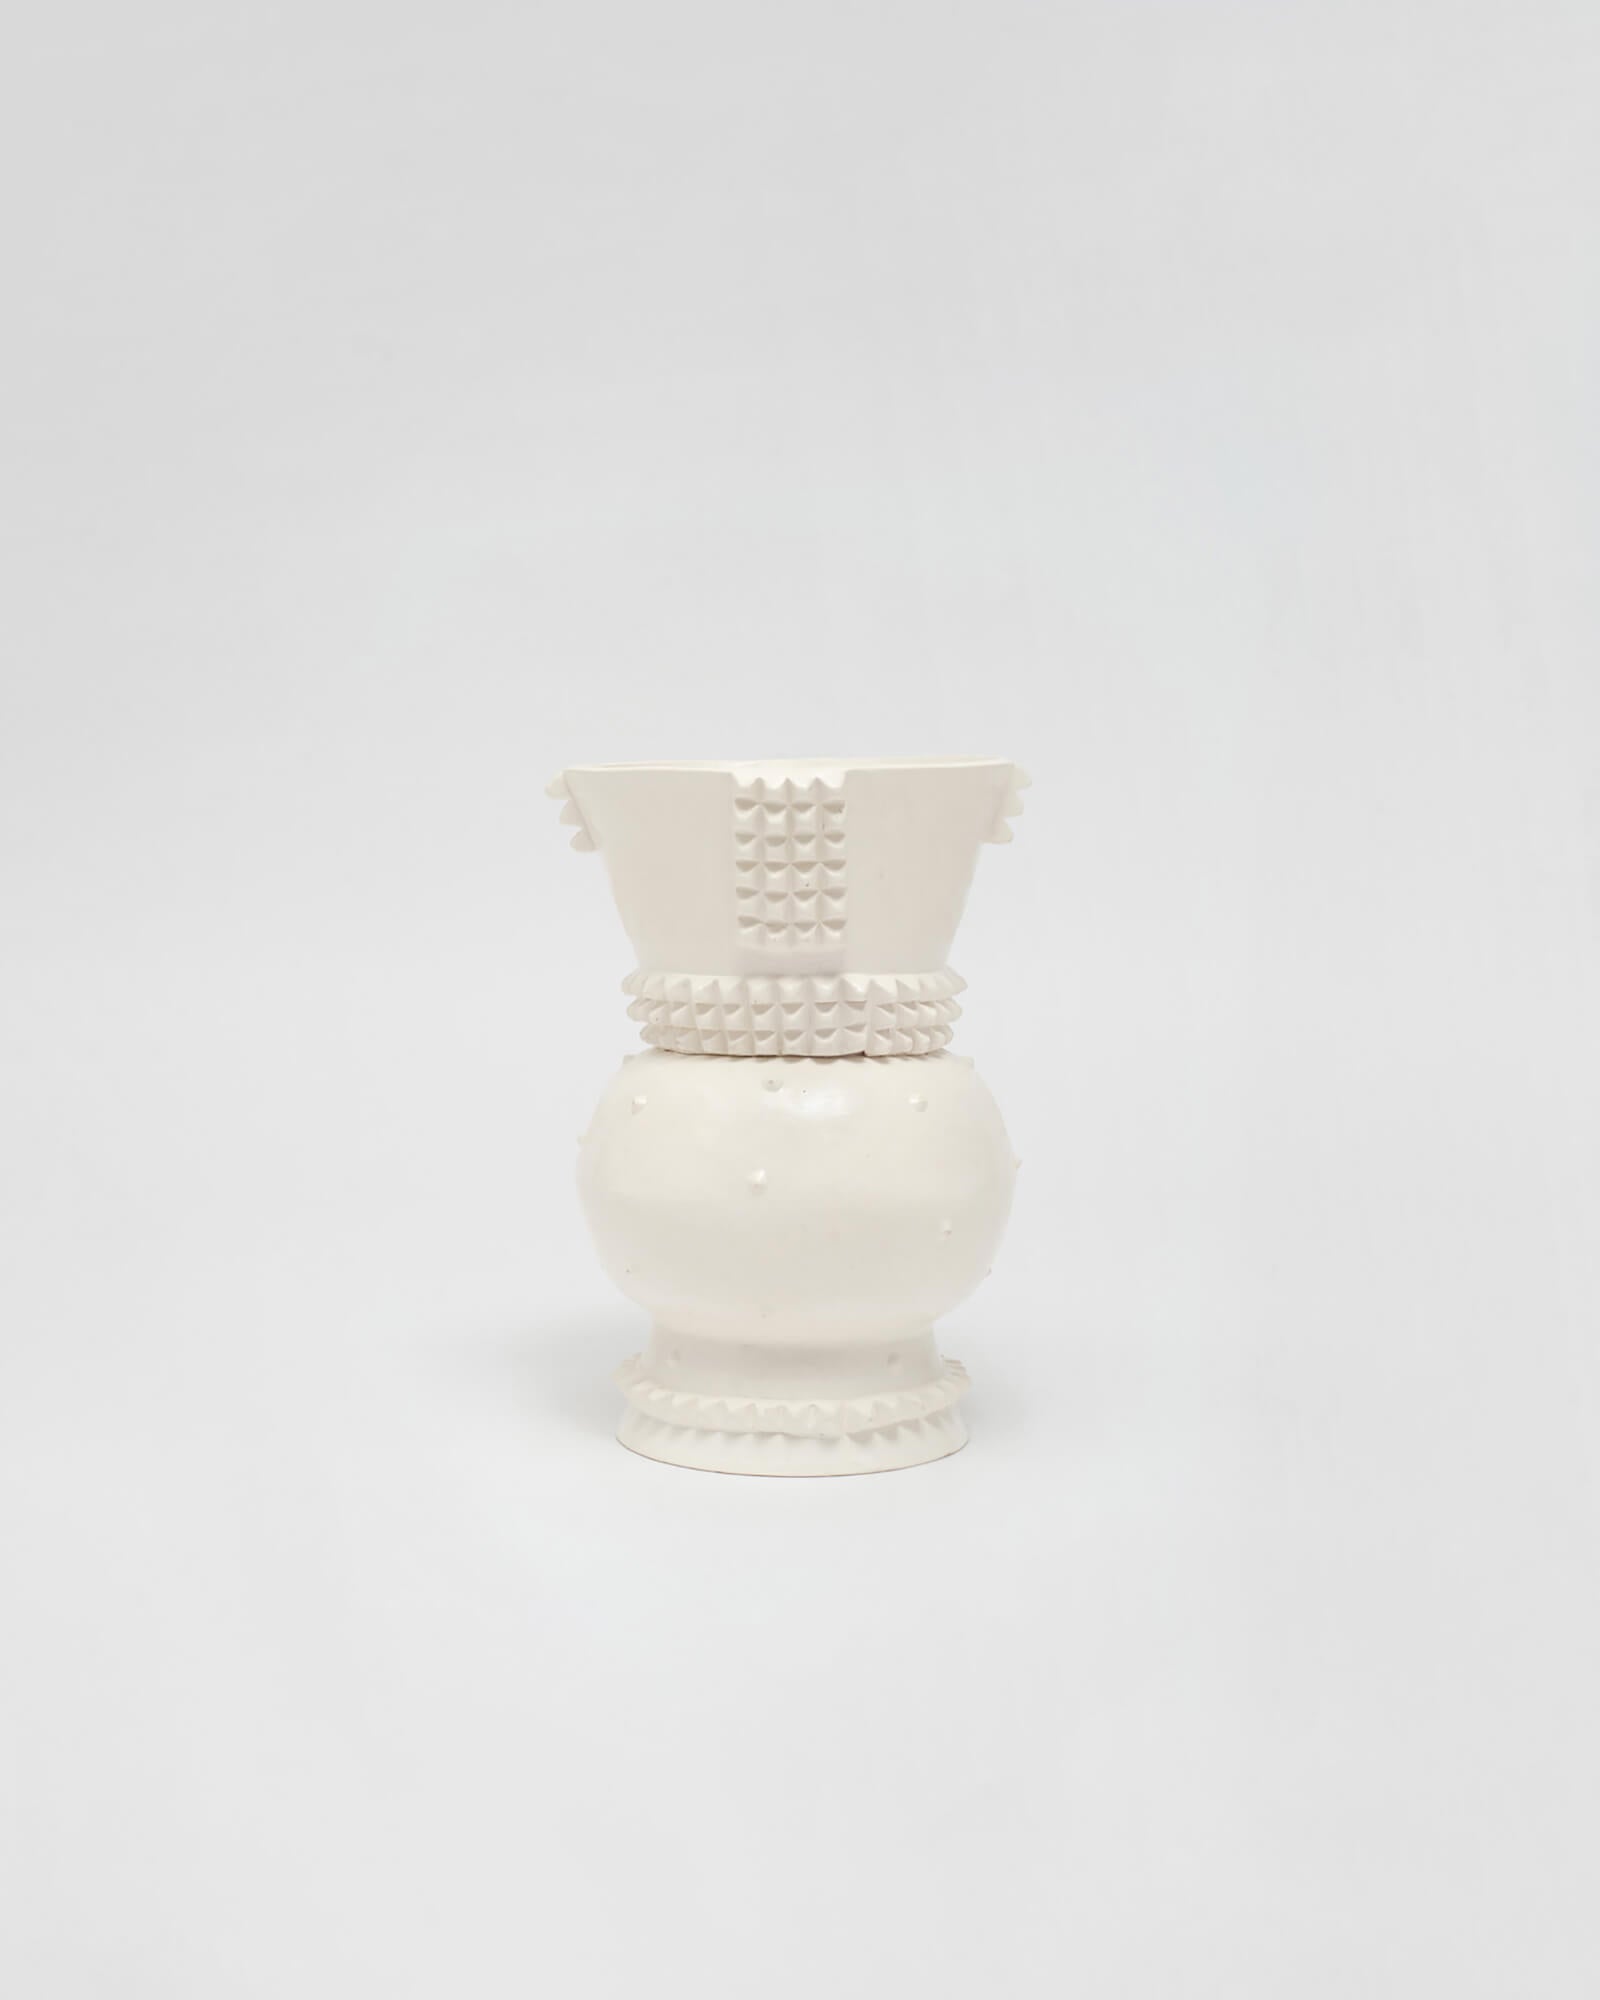 White ceramic sculpture inspired by traditional Zulu vessels